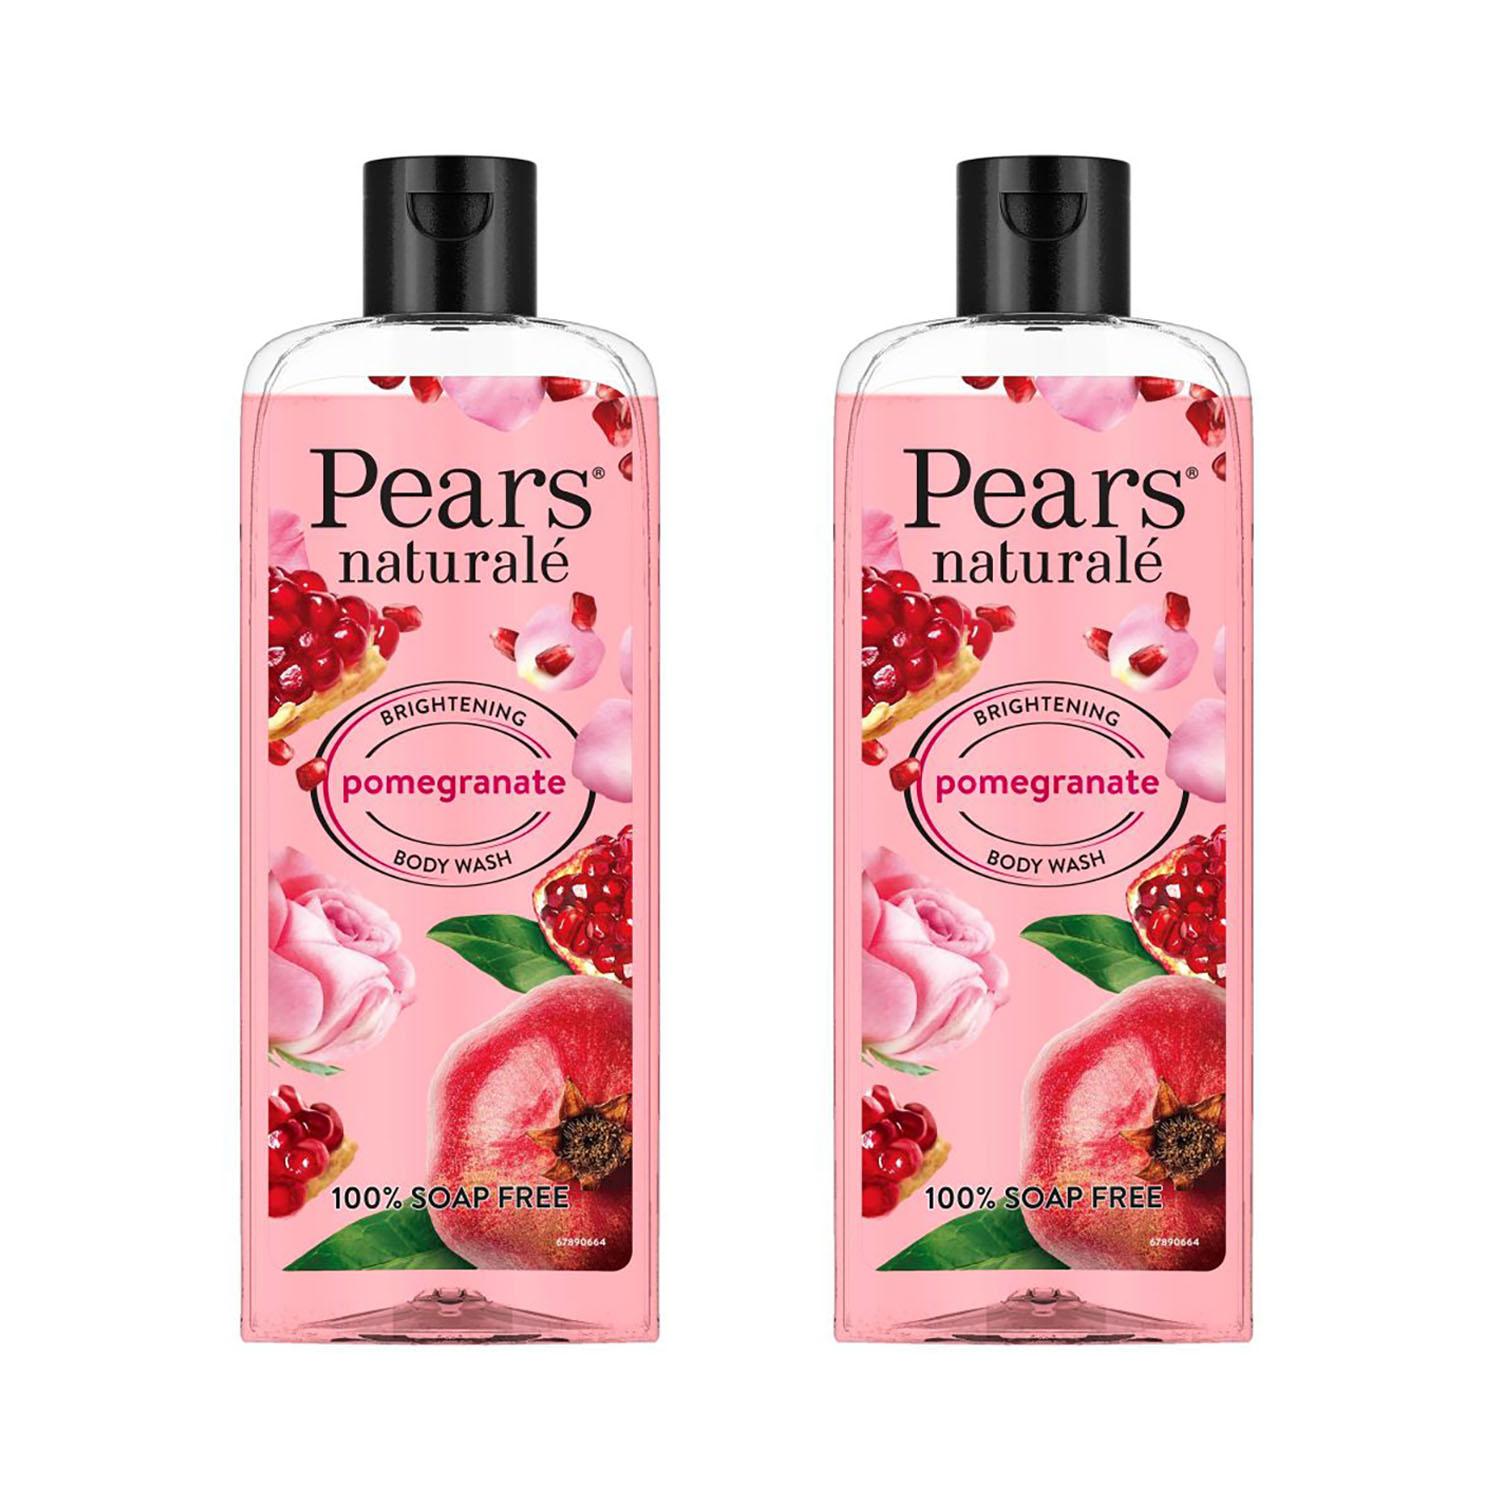 Pears | Pears Naturale  Brightening Pomegranate Bodywash (250ml) (Pack of 2) Combo